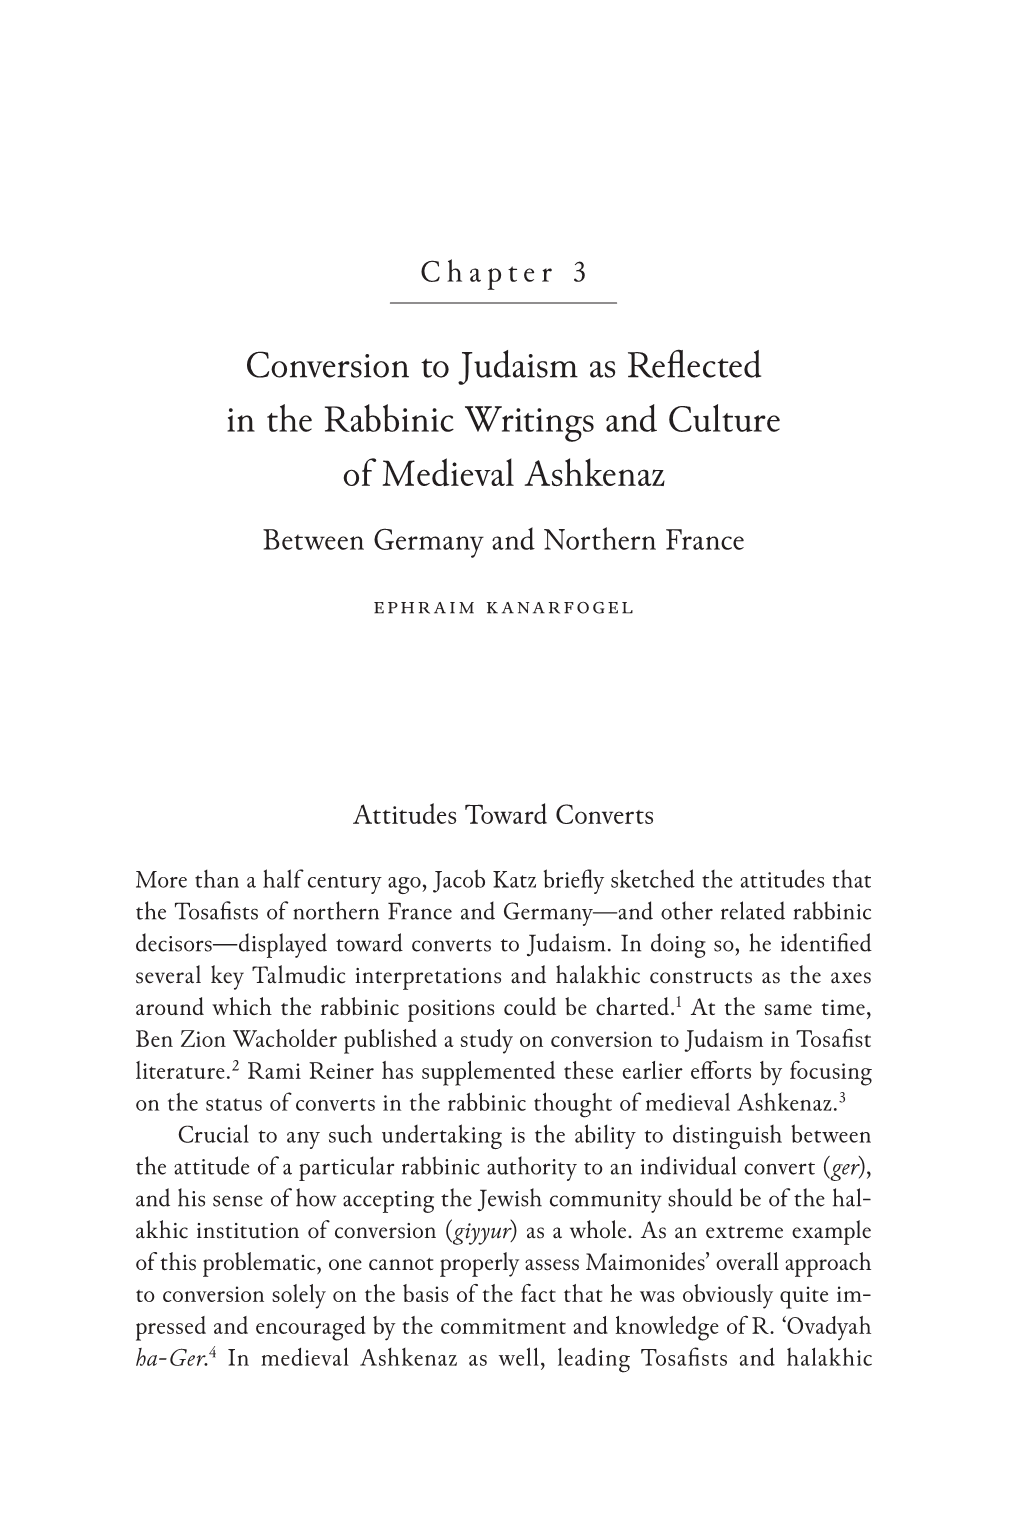 Conversion to Judaism As Reflected in the Rabbinic Writings and Culture of Medieval Ashkenaz Between Germany and Northern France